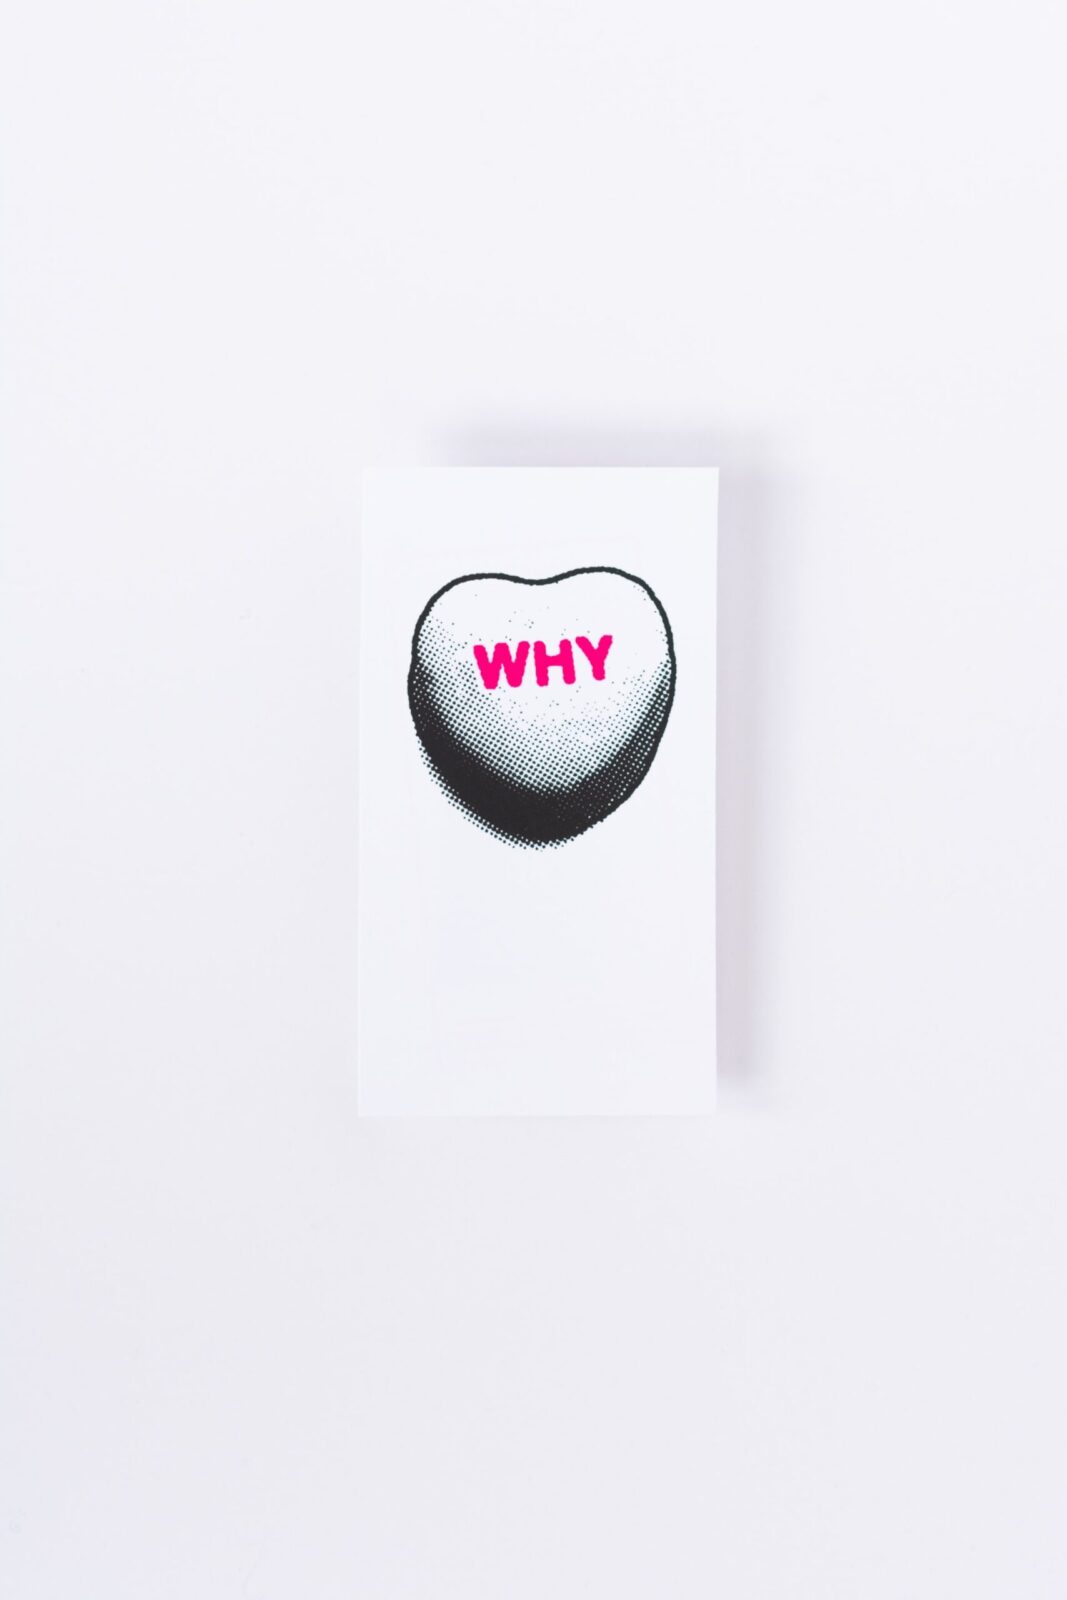 why? A Blog by Dr Gary Gruber